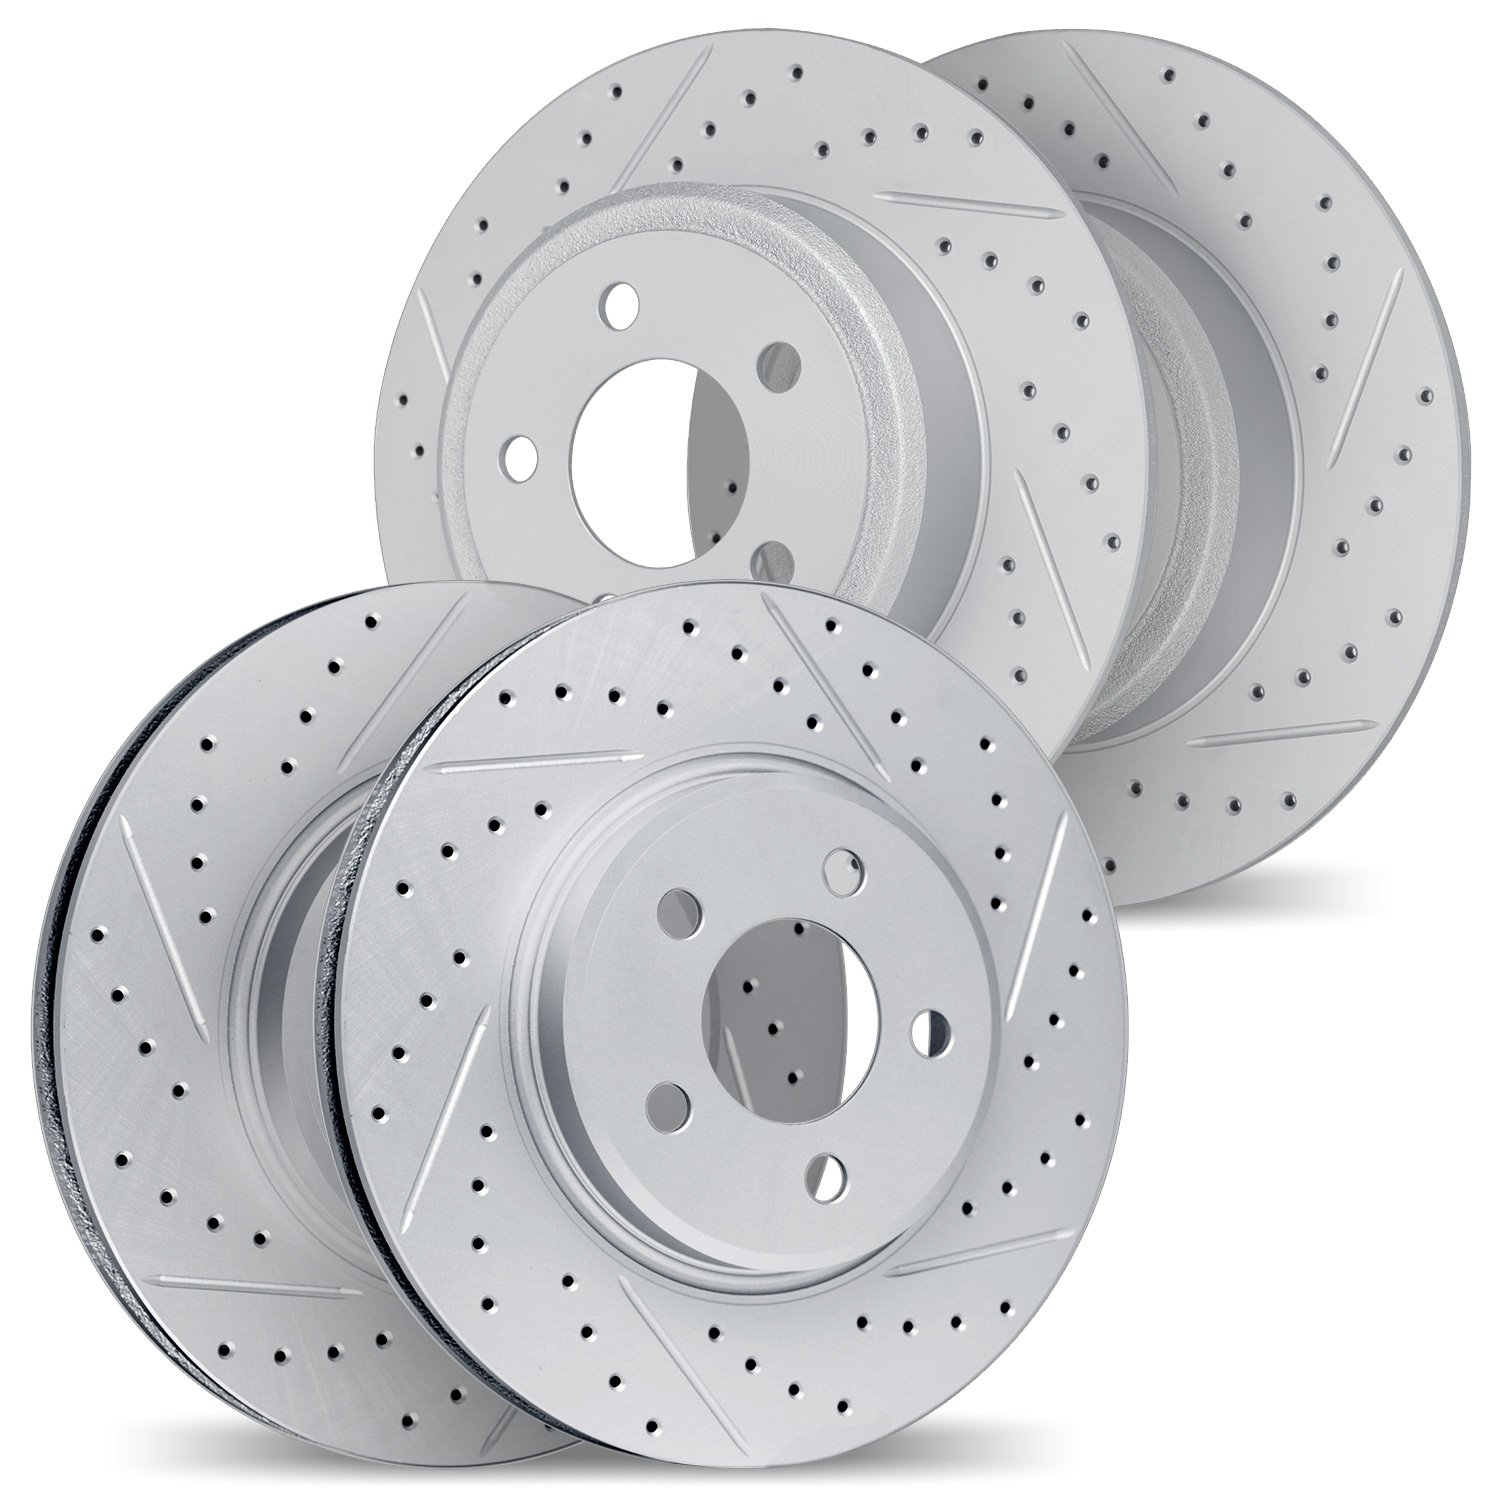 2004-74005 Geoperformance Drilled/Slotted Brake Rotors, 2005-2021 Audi/Volkswagen, Position: Front and Rear